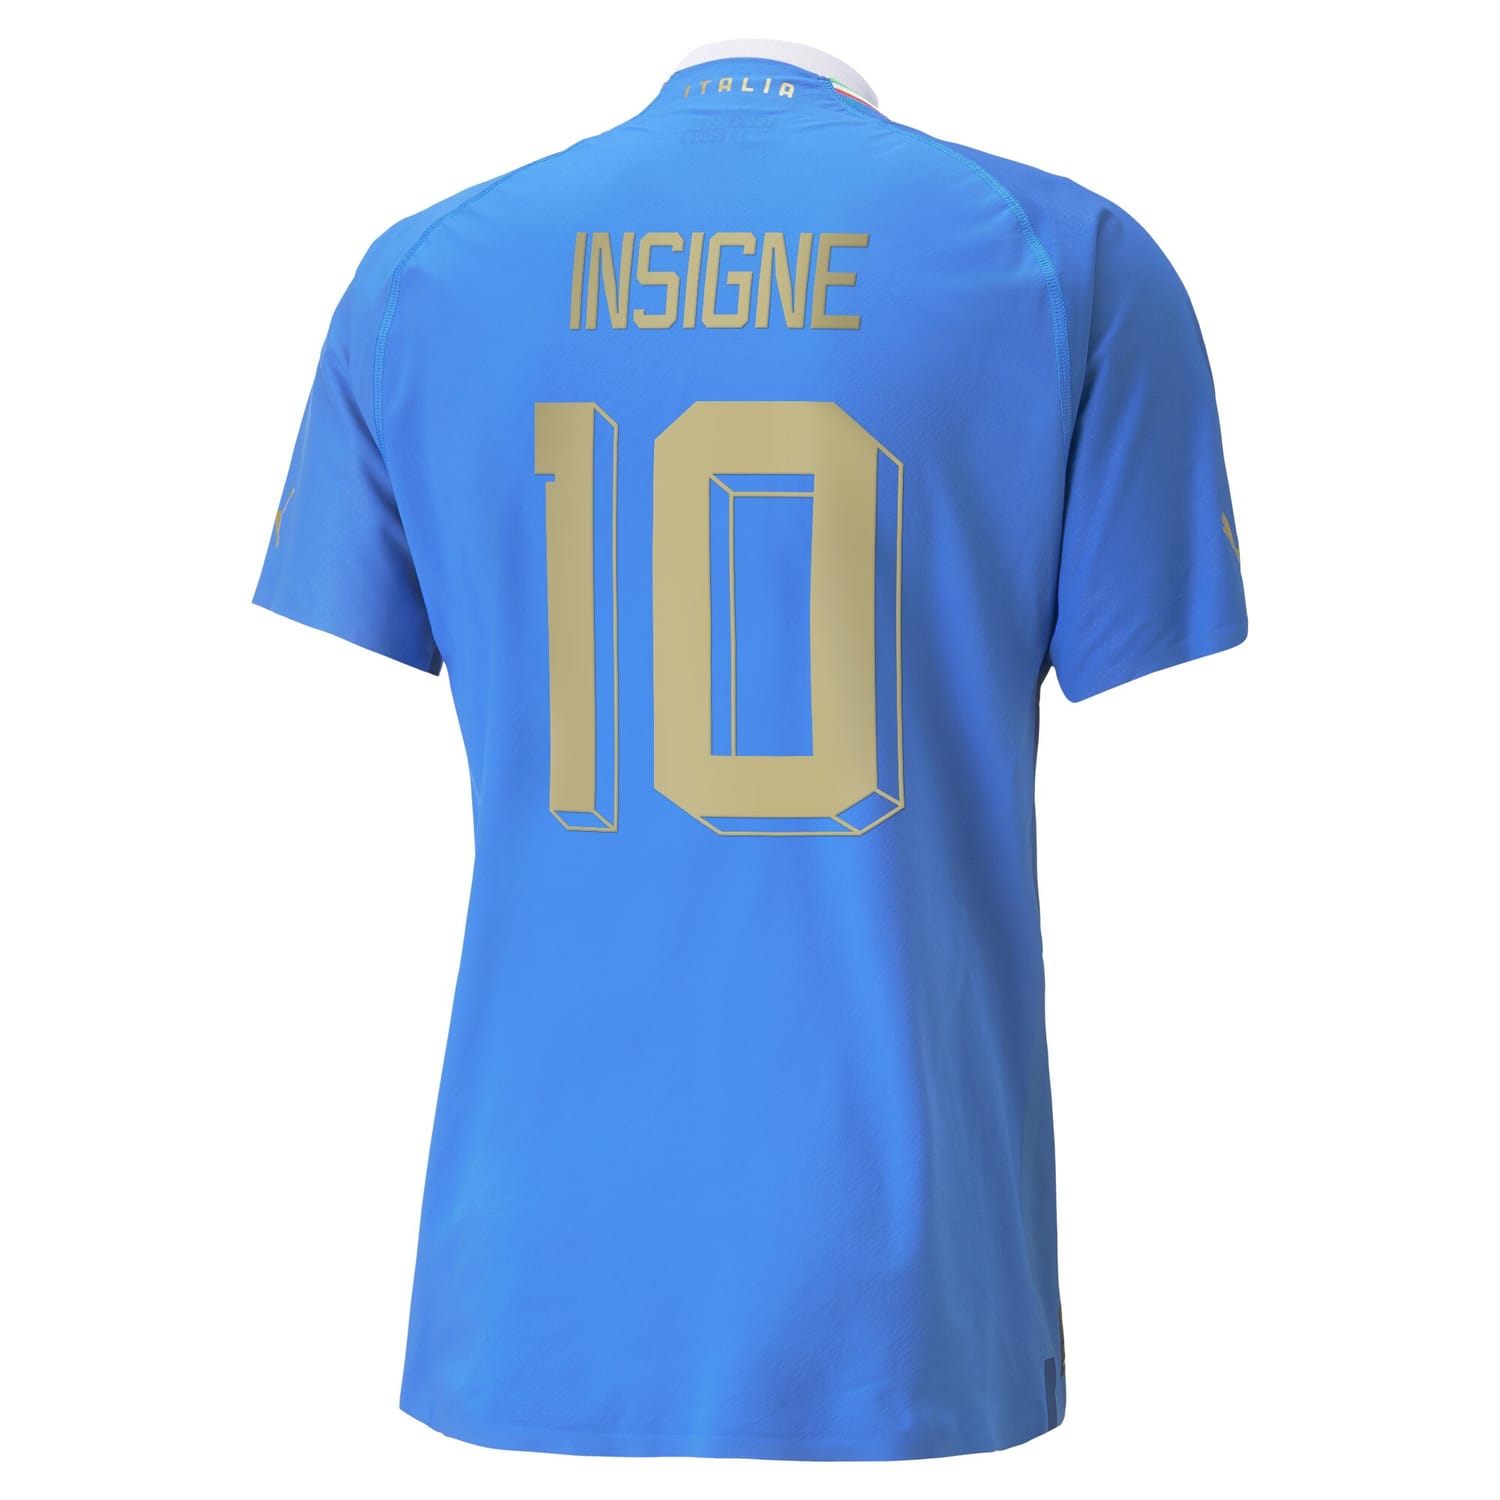 Italy National Team Home Authentic Jersey Shirt Blue 2022-23 player Lorenzo Insigne printing for Men